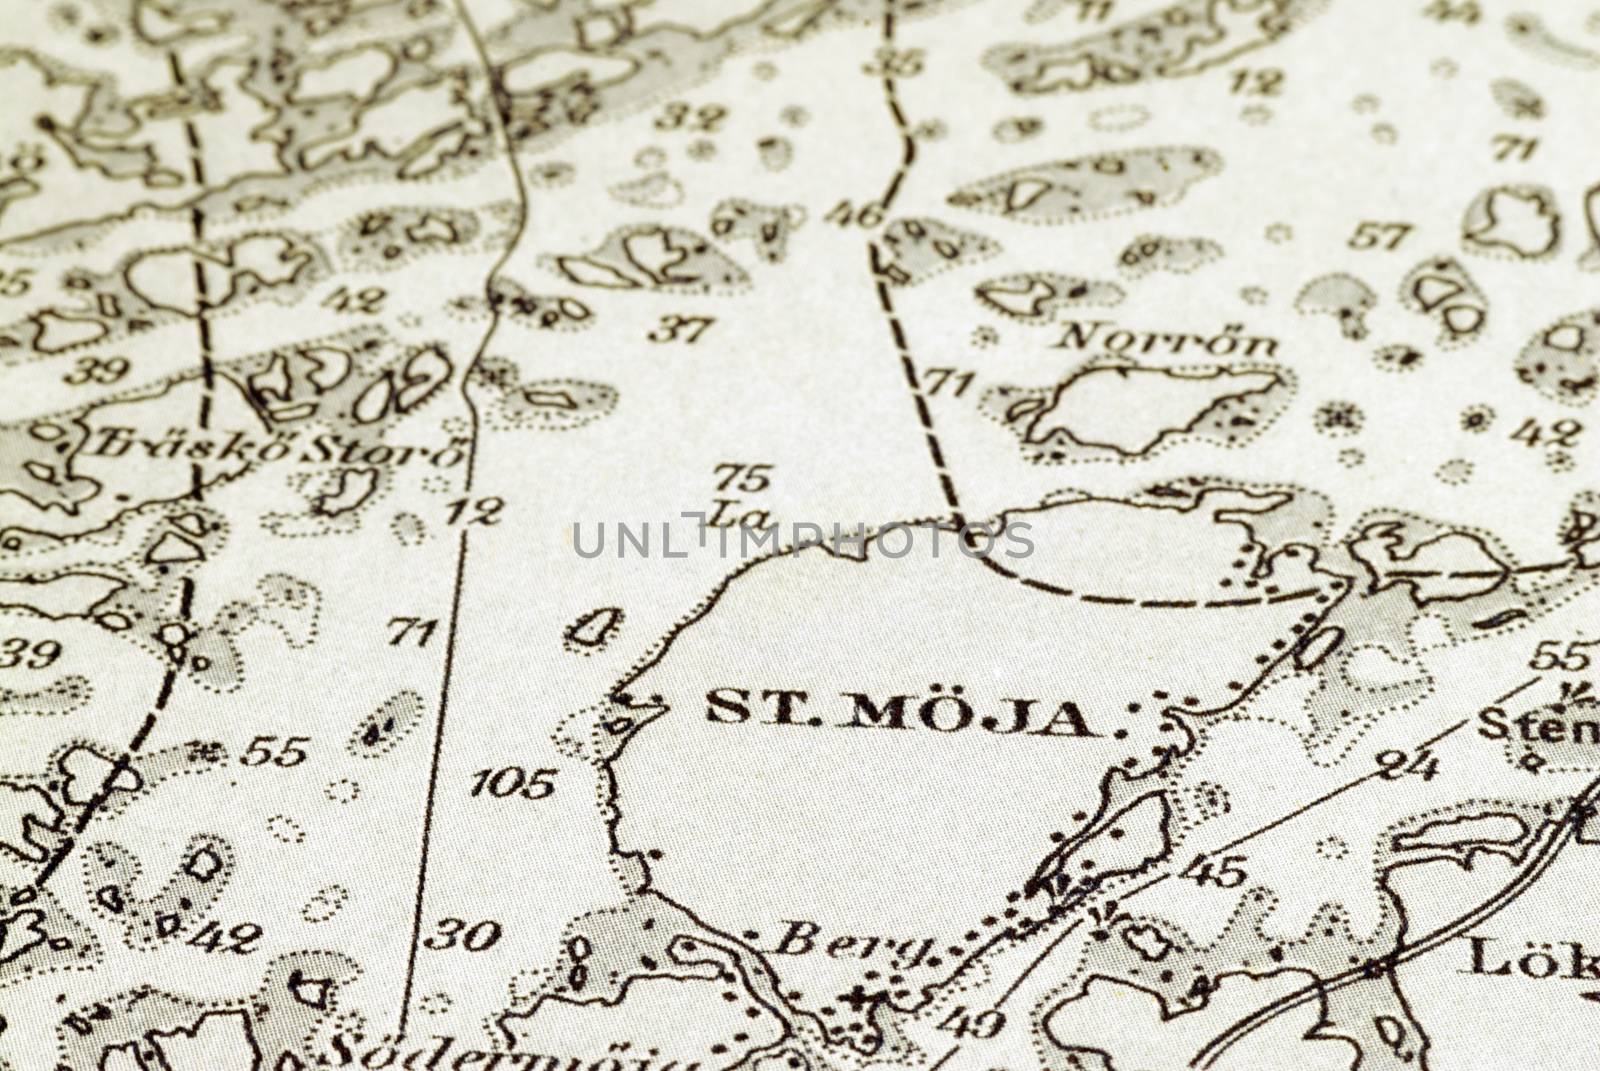 Macro shot of a marine very old chart, detailing Stockholm archipelago with the island "St.Möja" in focus.